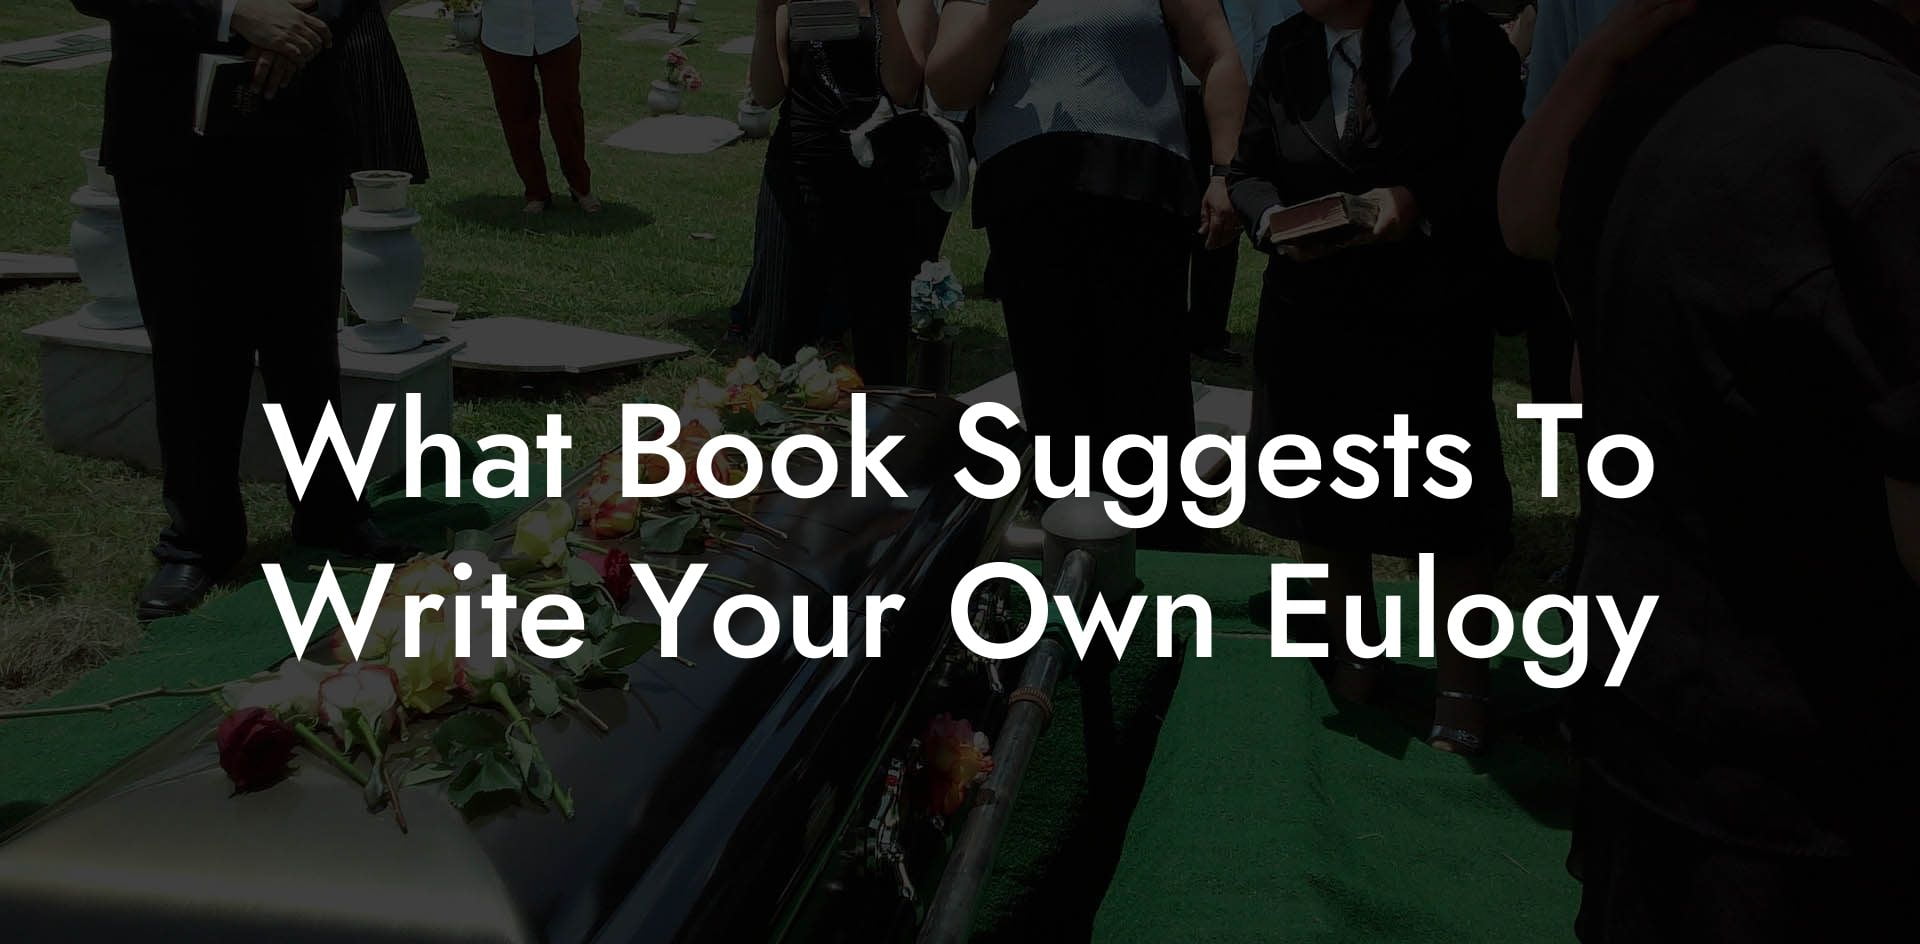 What Book Suggests To Write Your Own Eulogy